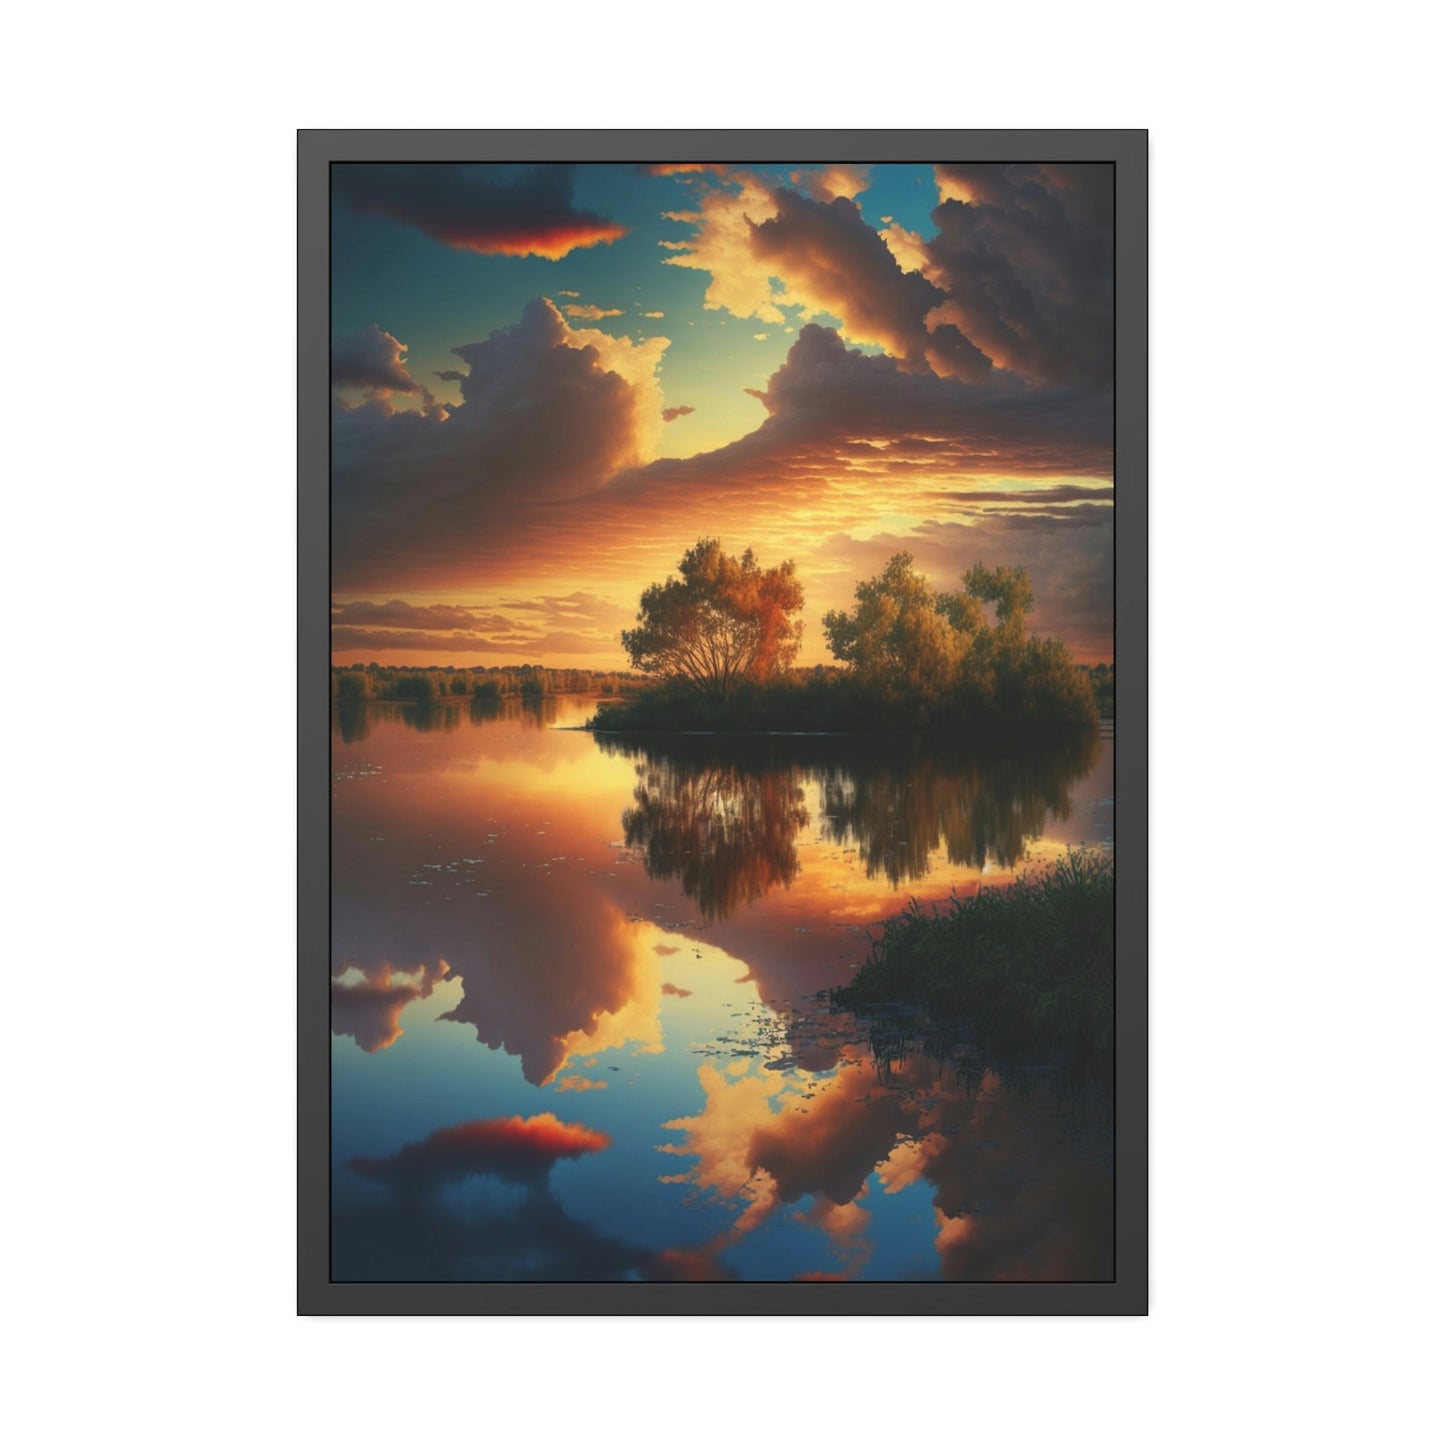 Lake Reflections: Framed Canvas & Poster Print of a Picturesque Lakeshore